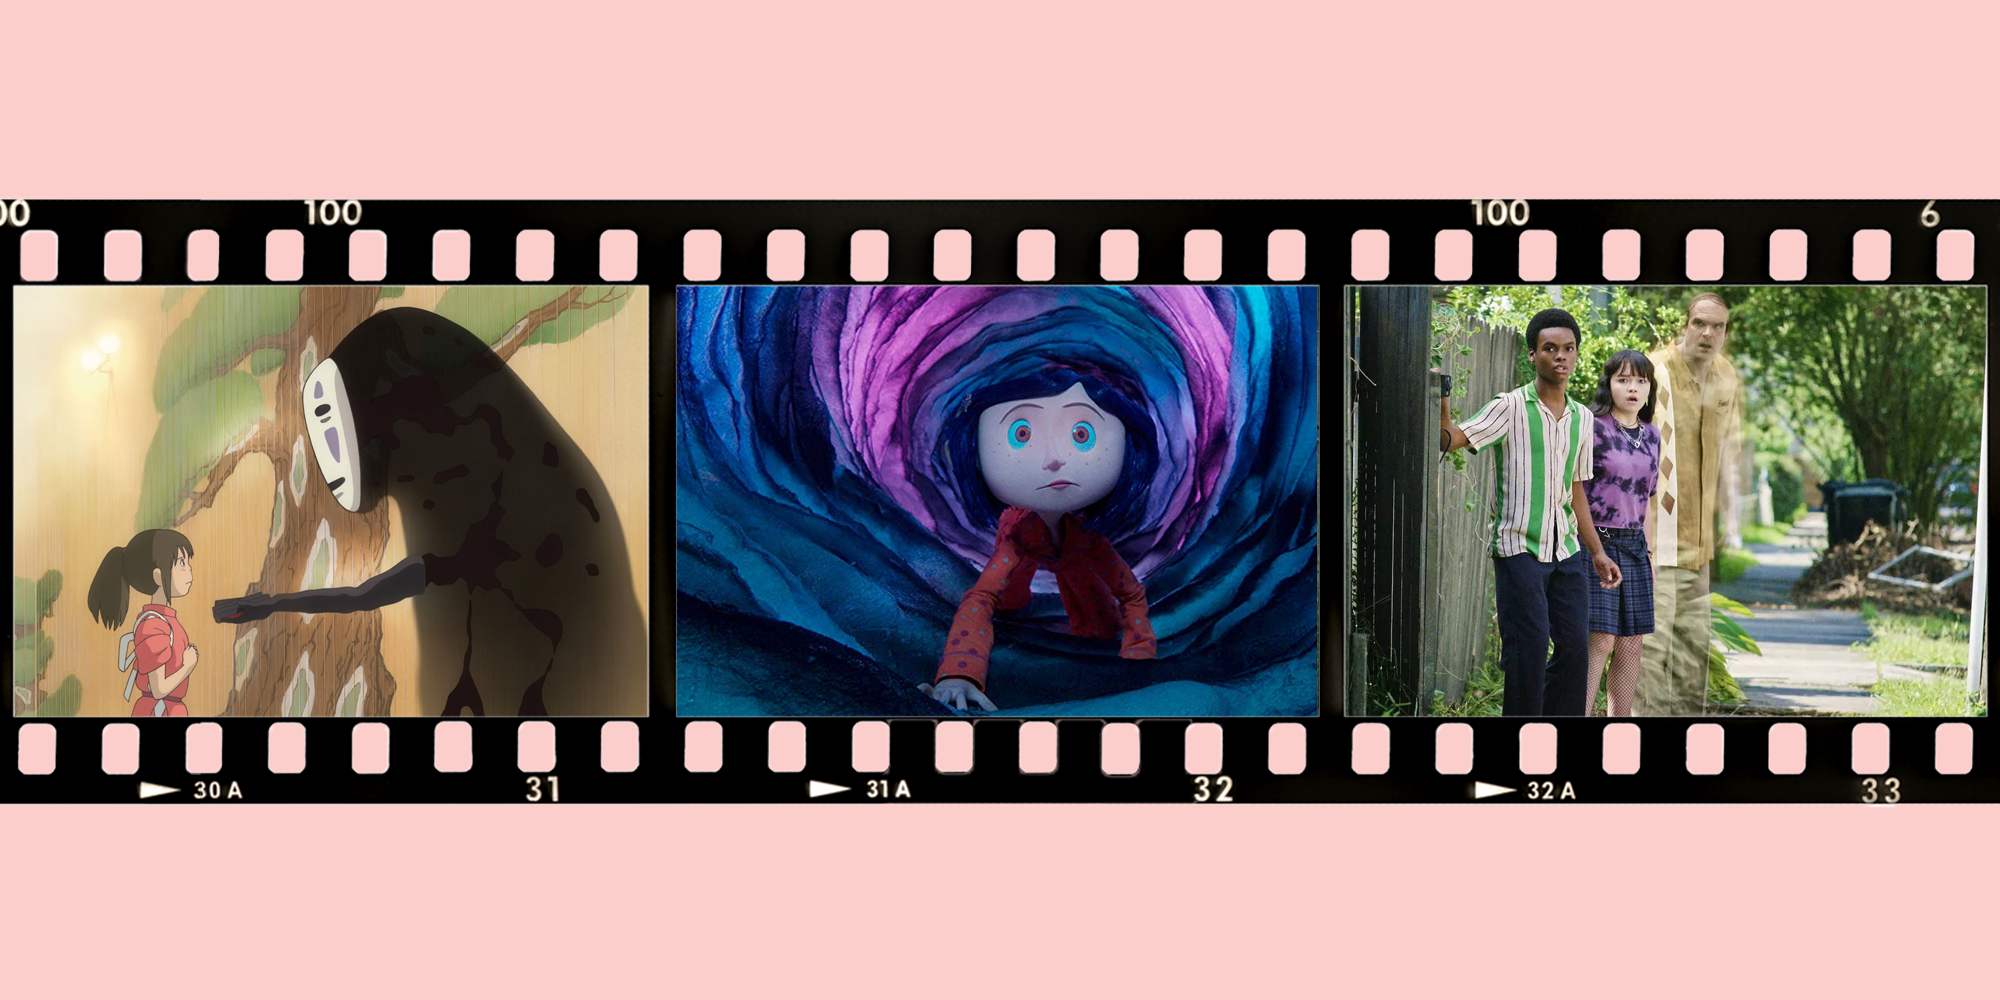 10 creepy movie dolls you really don't want in your house, ranked